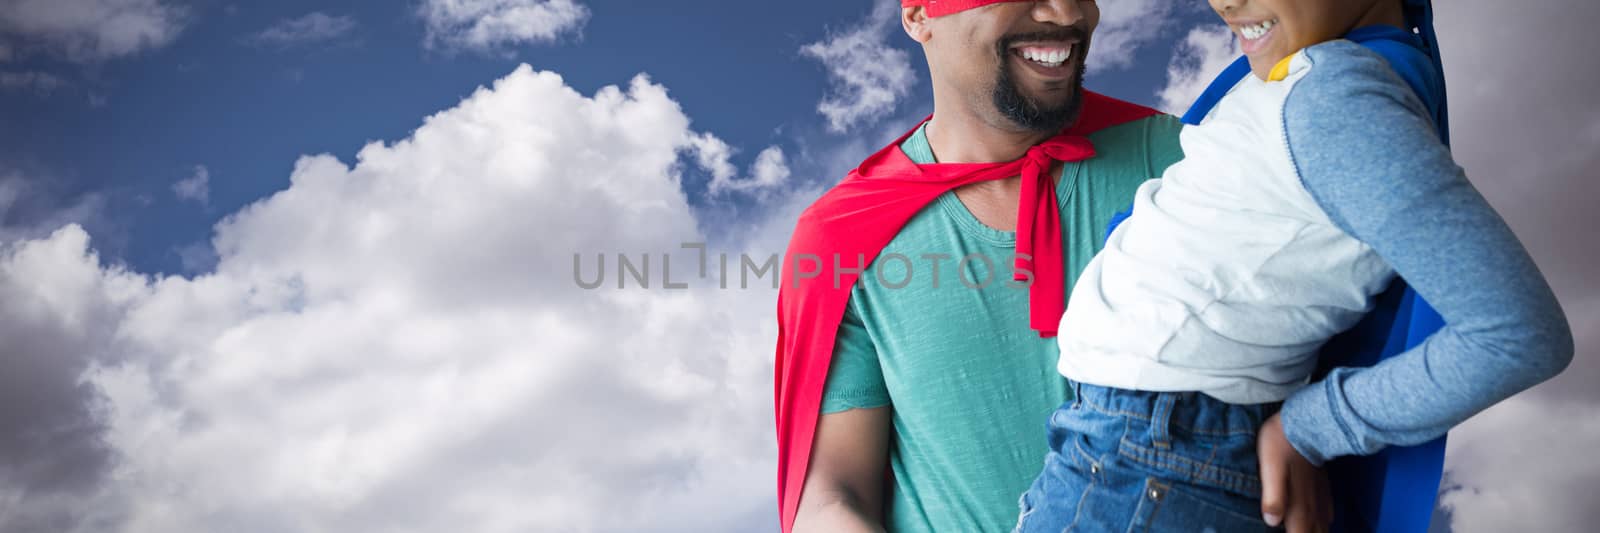 Composite image of father and son pretending to be superhero by Wavebreakmedia